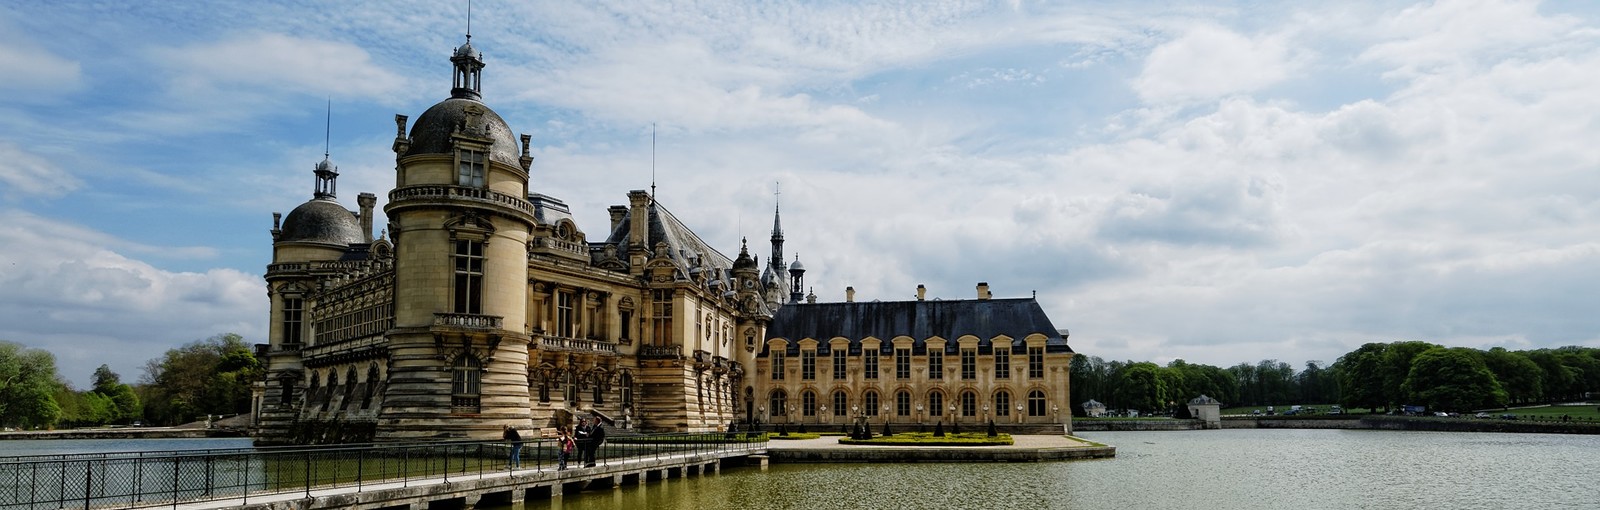 Tours Chantilly - Half days - Day tours from Paris